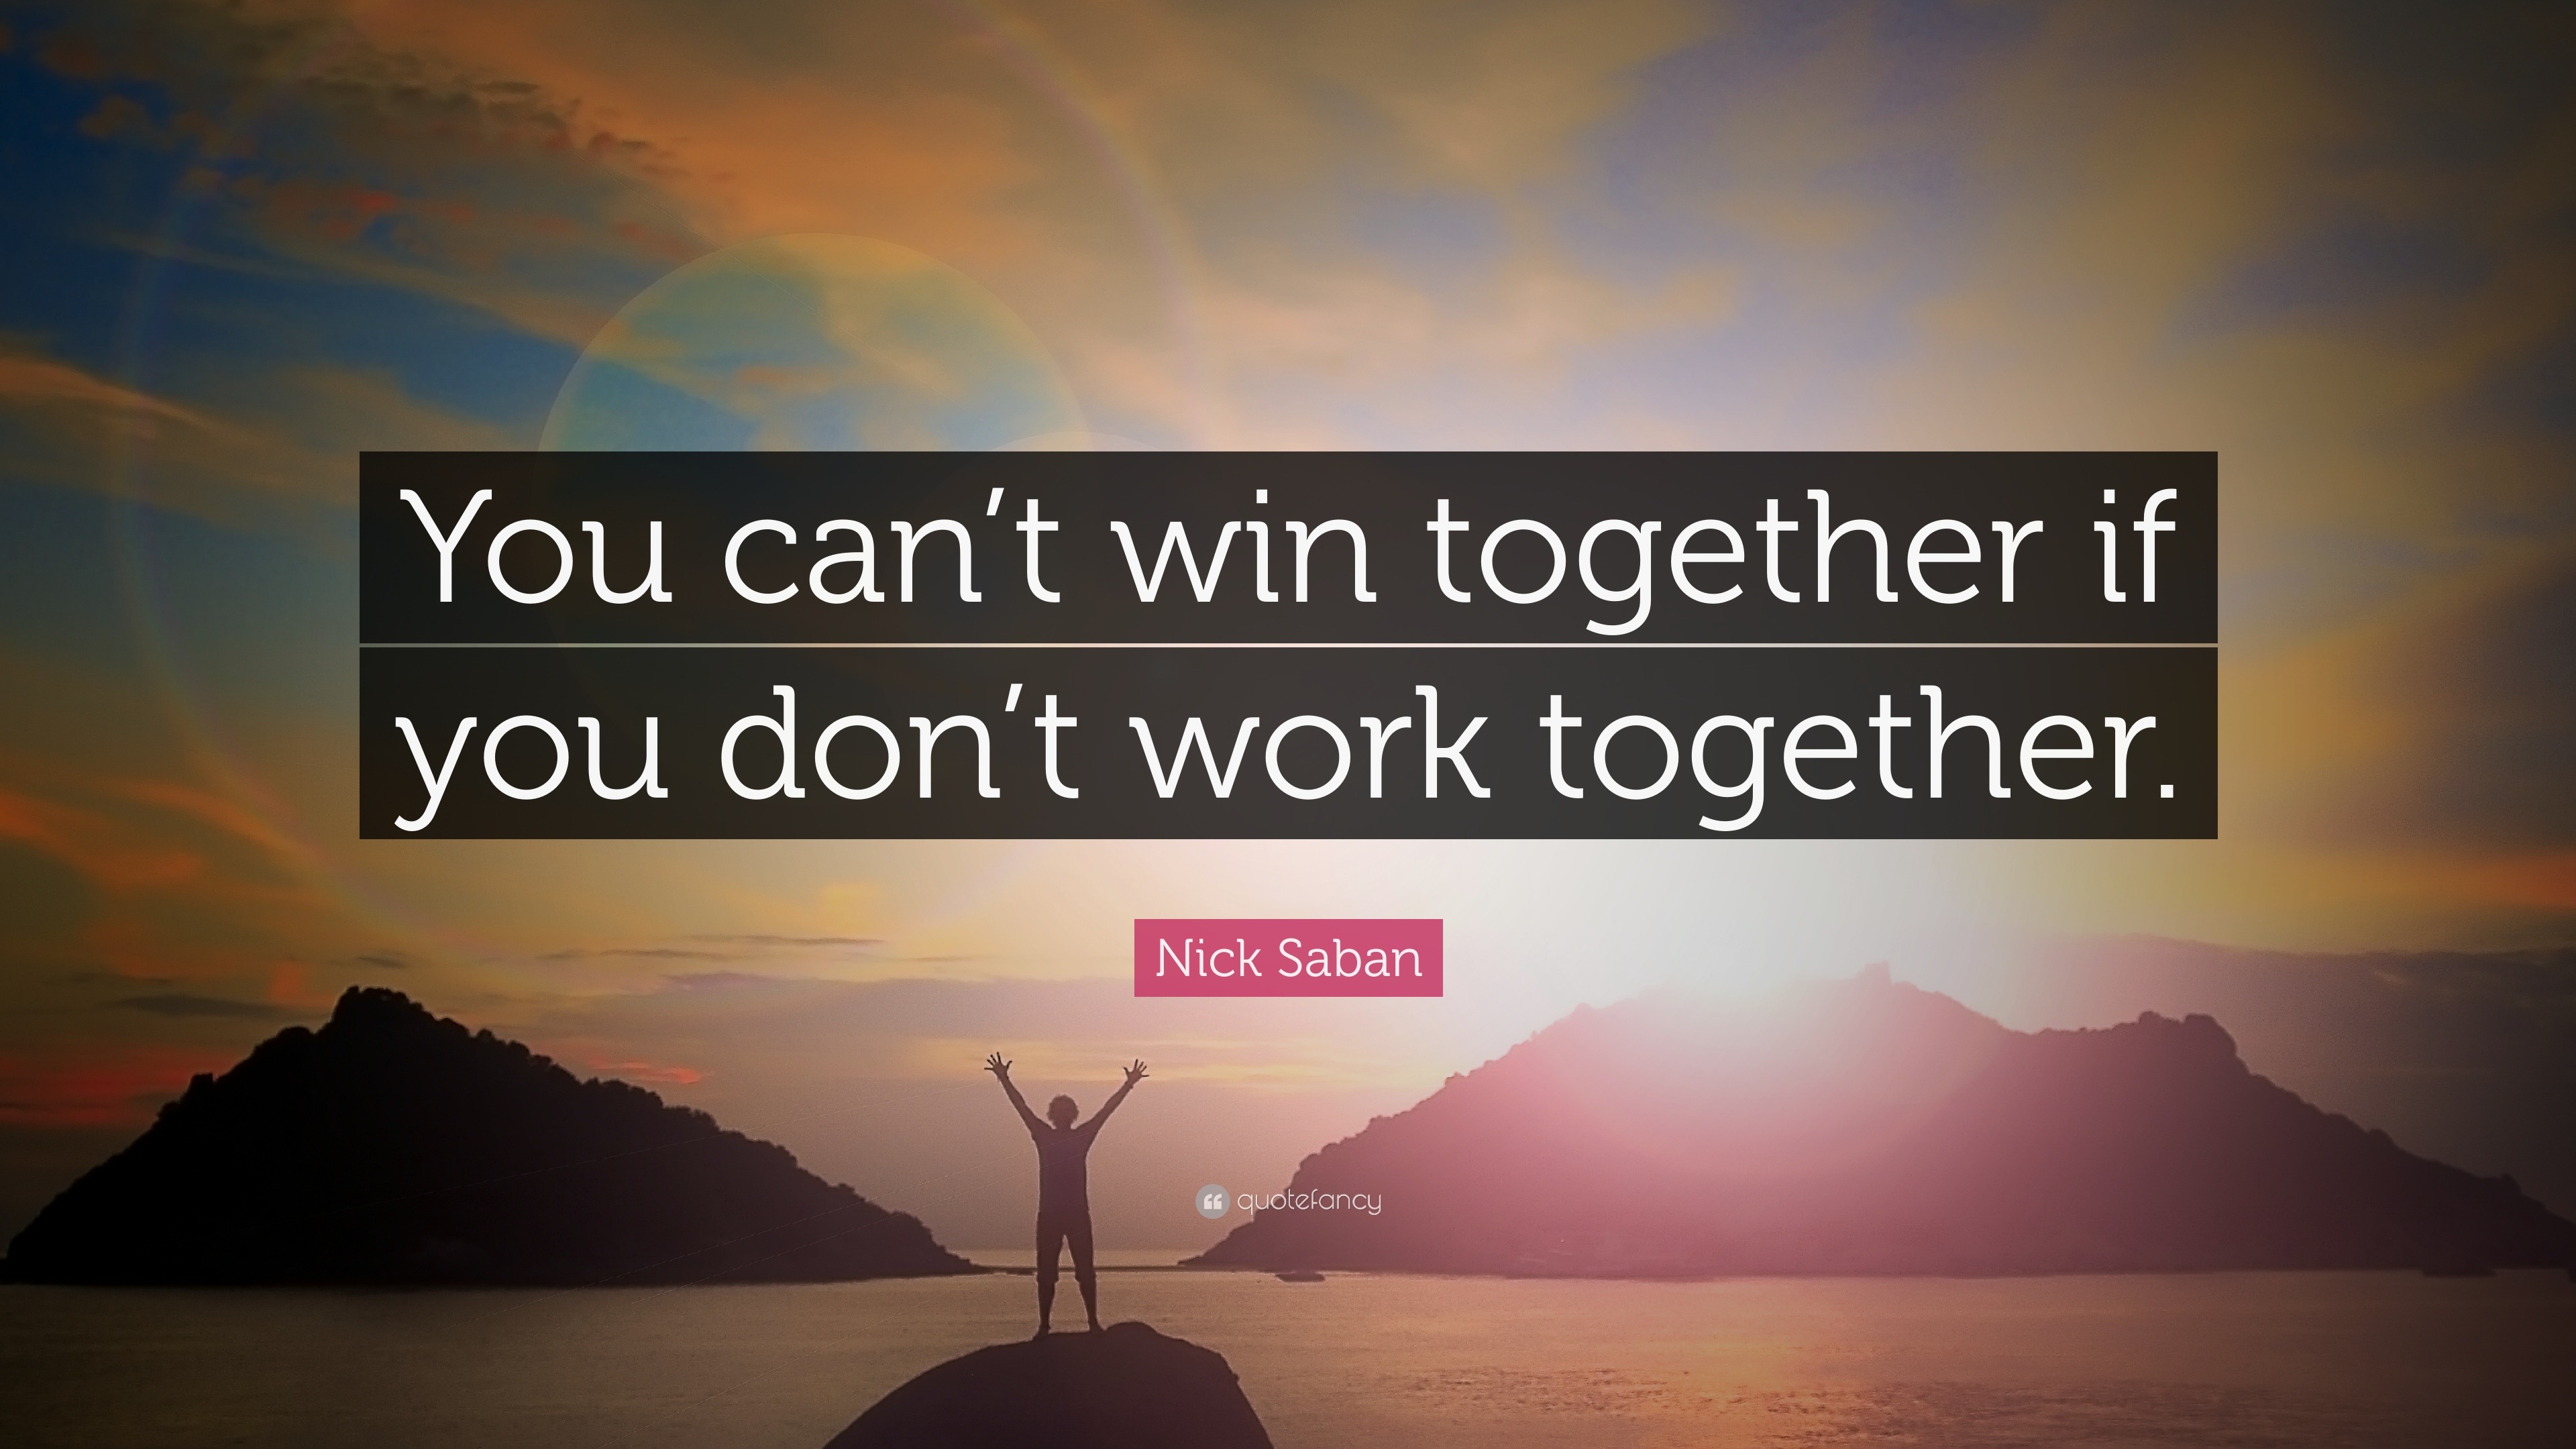 Nick Saban Quote “You can’t win together if you don’t